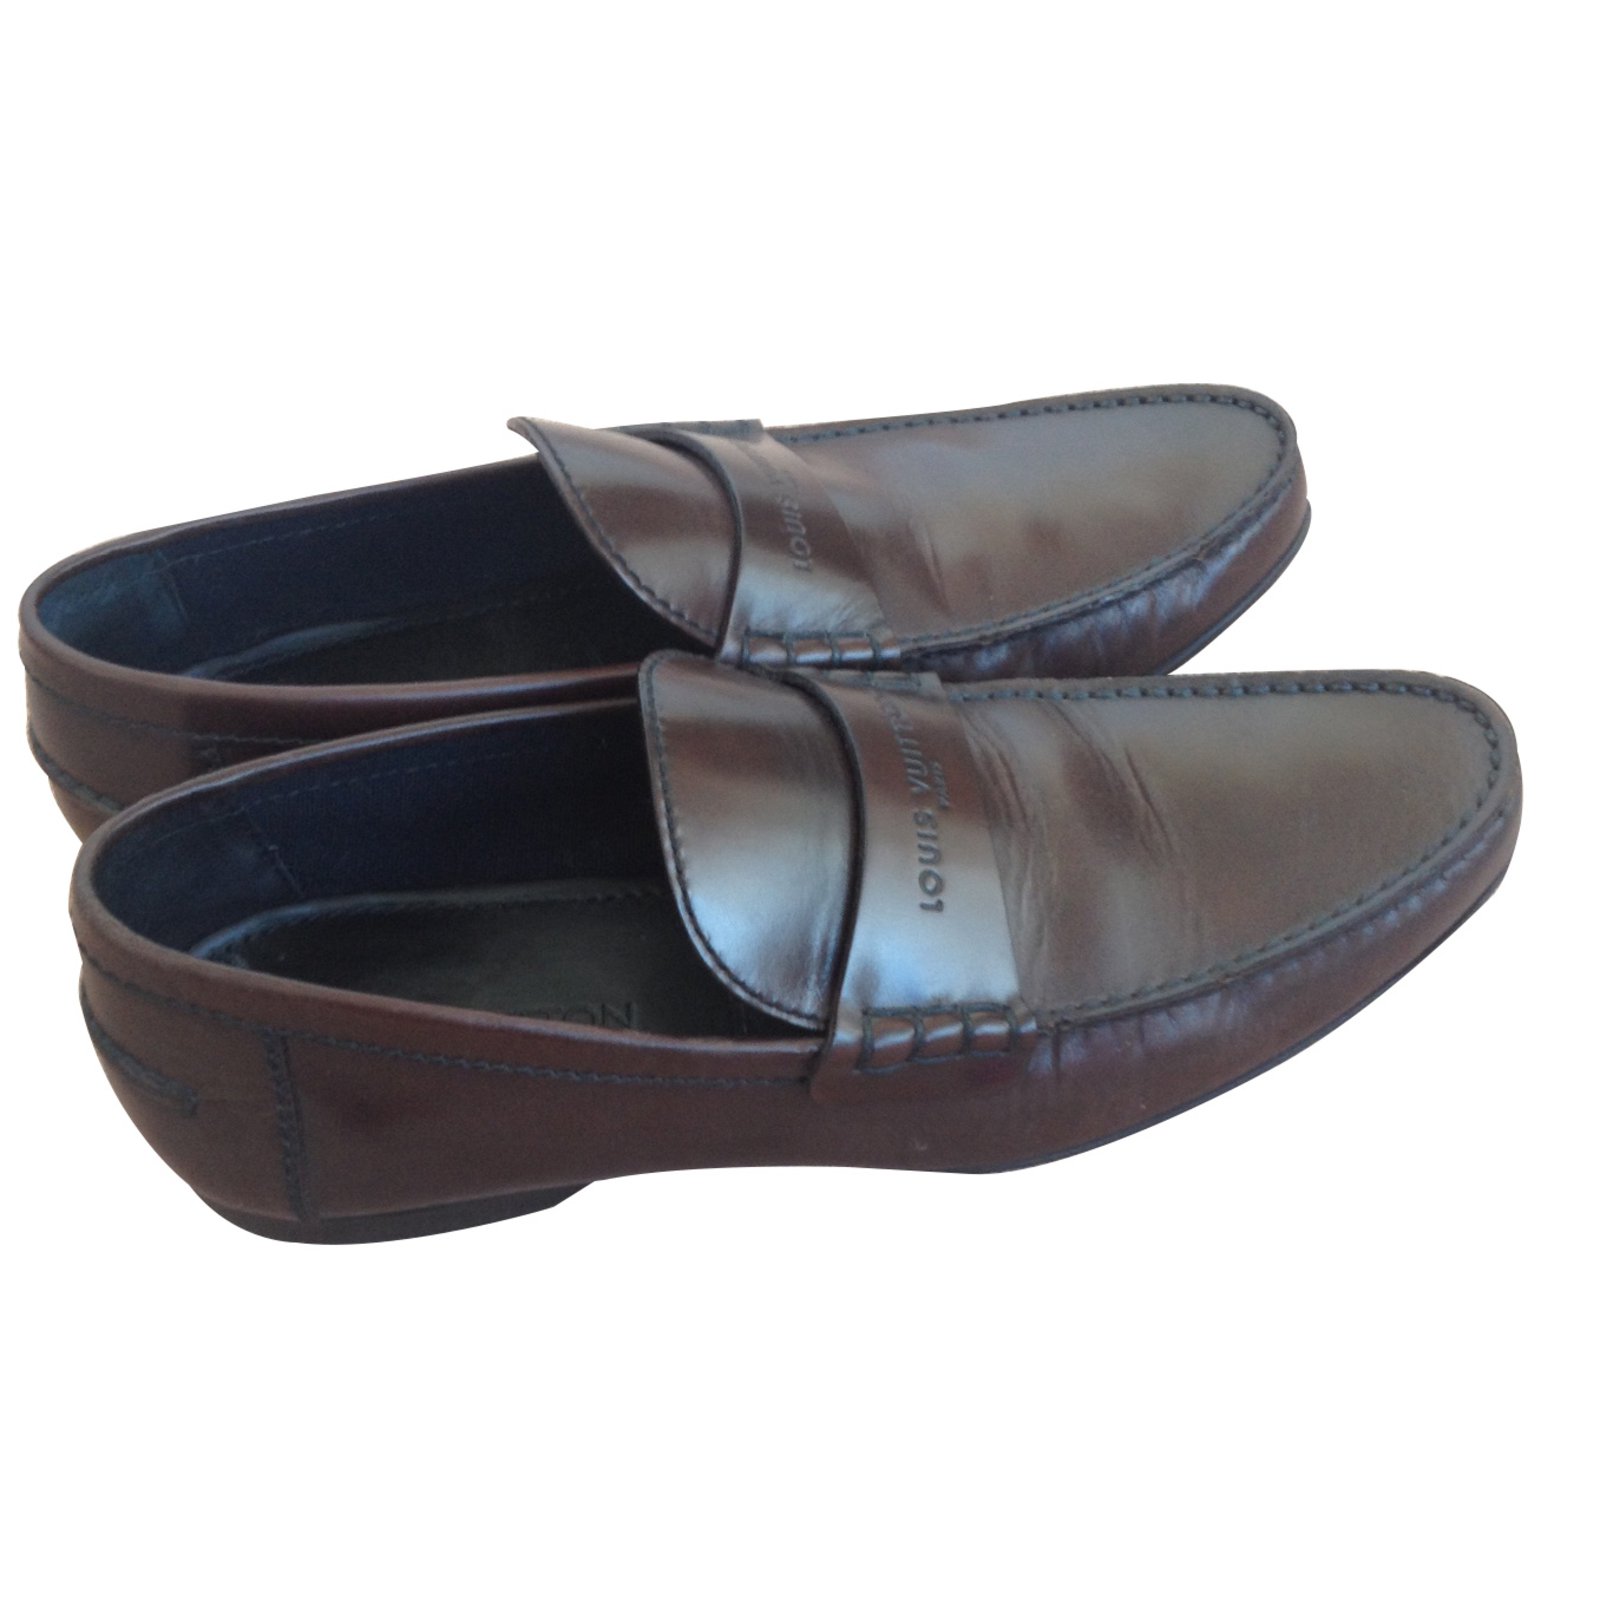 Louis Vuitton Brown Loafers & Slip-Ons for Men